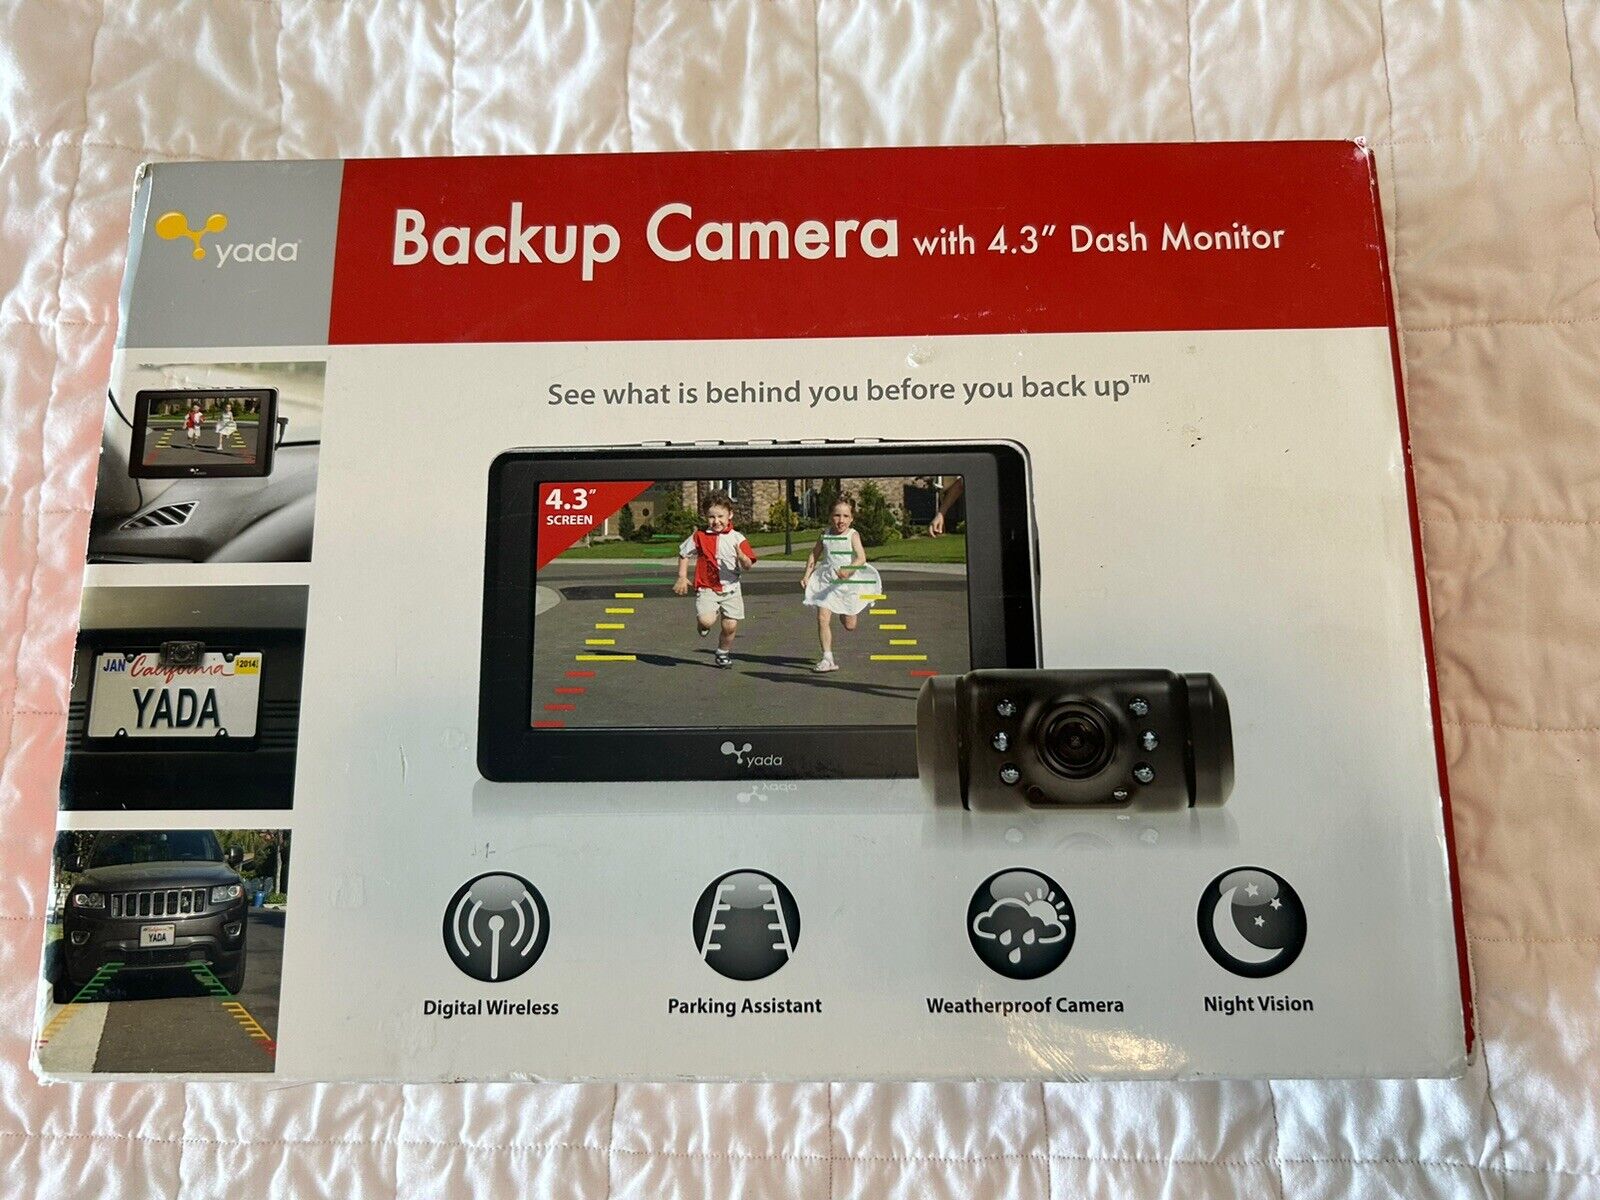 New Yada Backup Camera And 4.3” Monitor for safety rear view